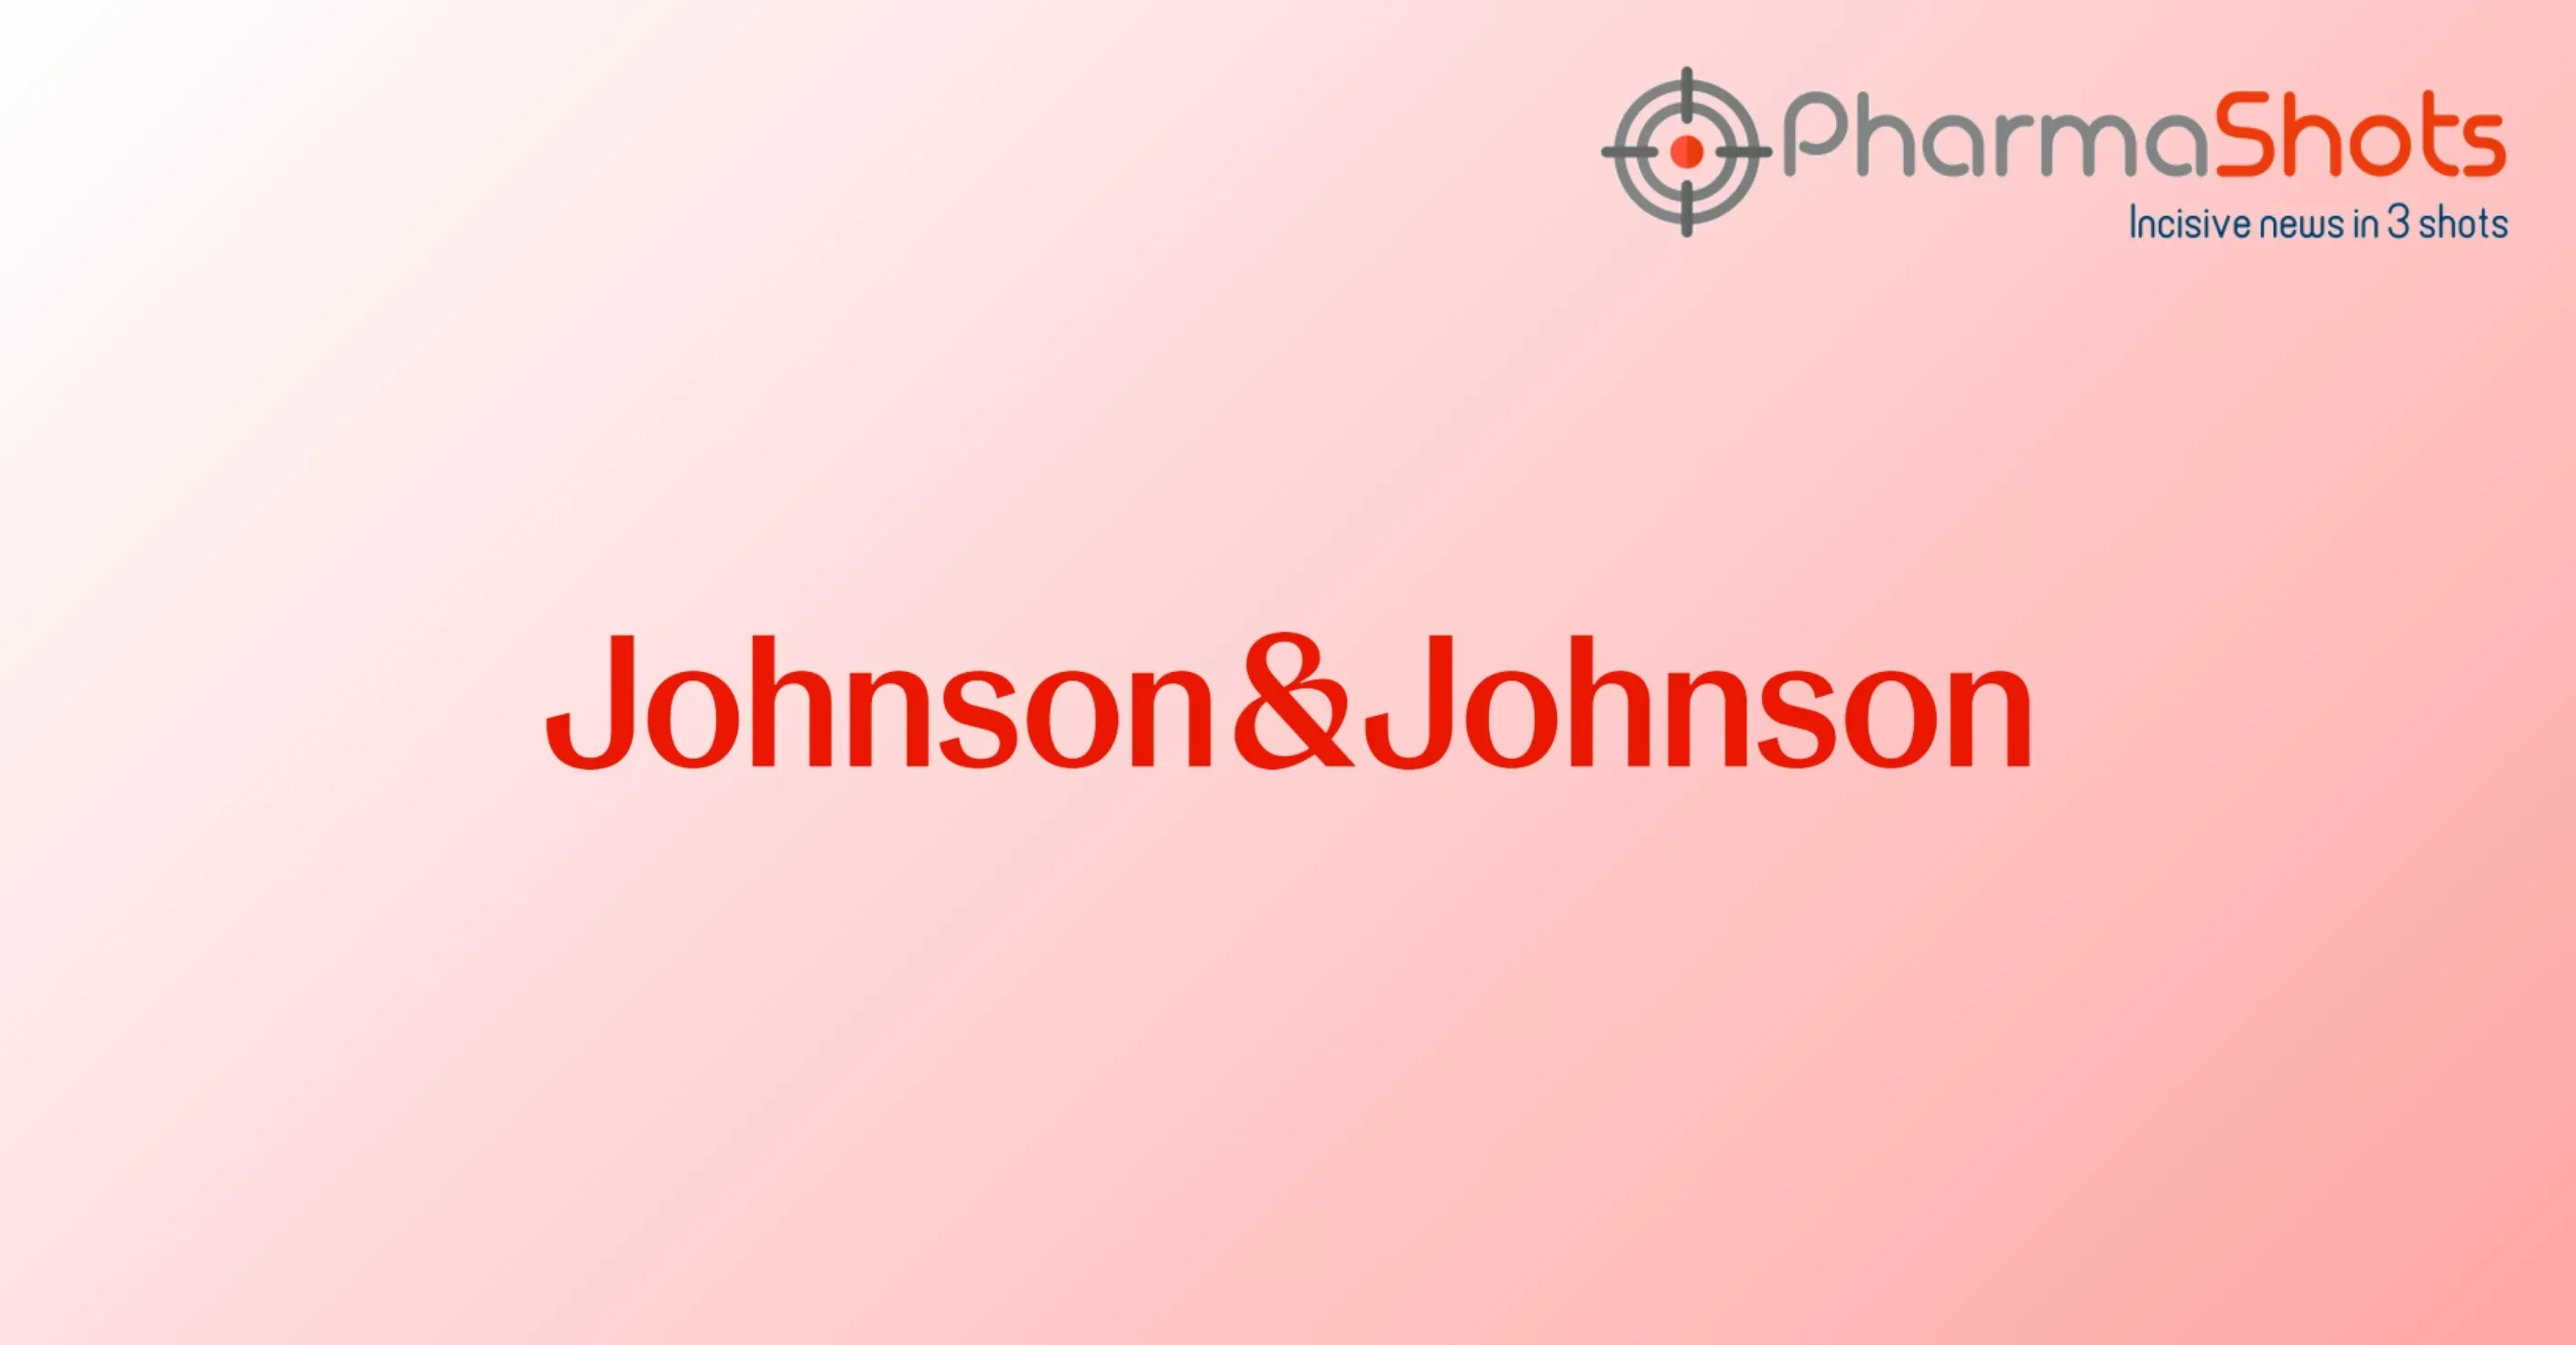 Johnson & Johnson’s Sirturo Gains the CHMP’s Positive Opinion to Treat Multidrug-Resistant Tuberculosis